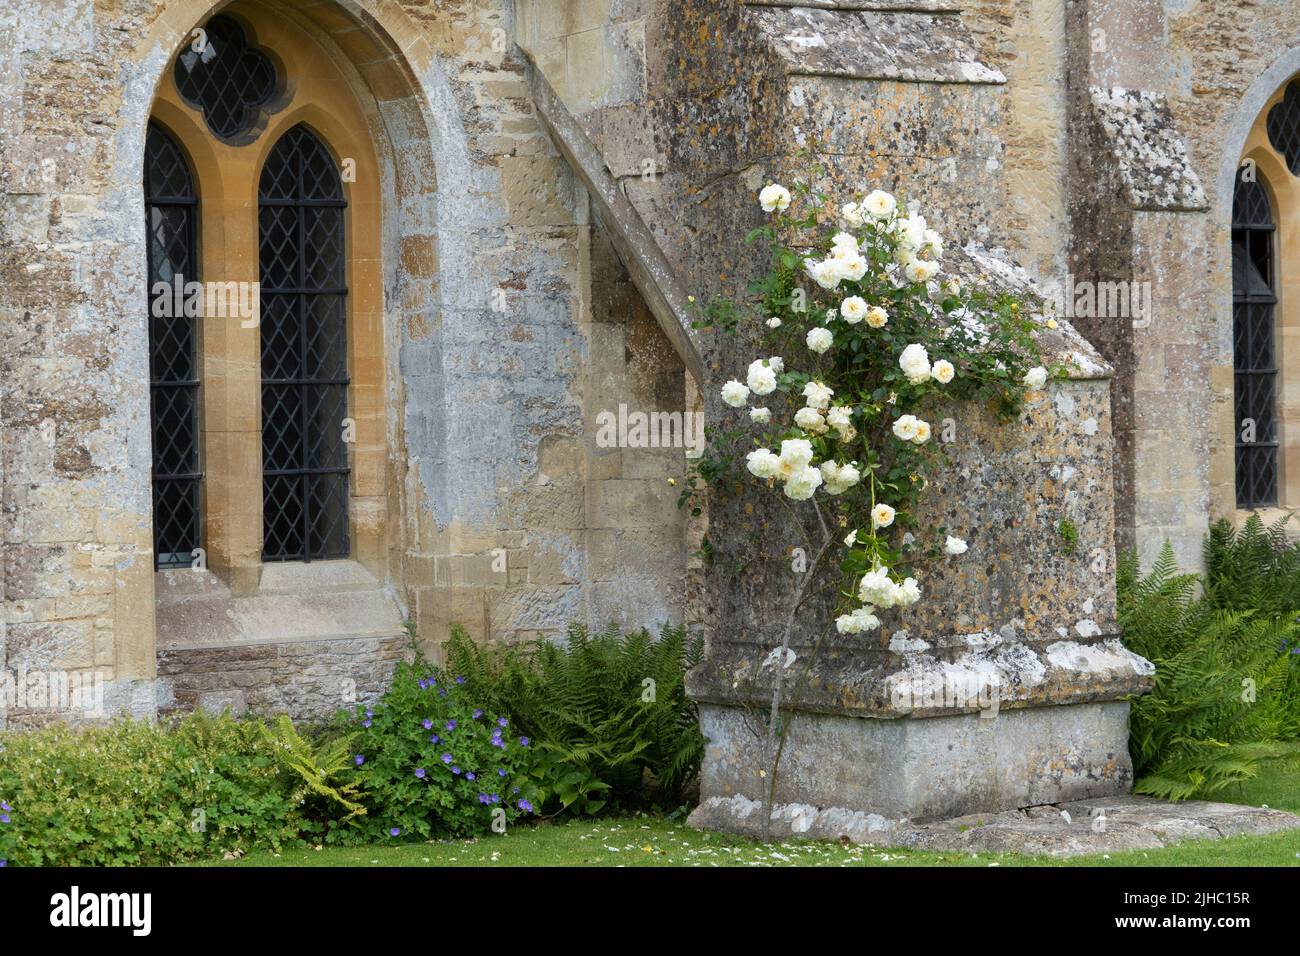 A bush of white roses on outside of old abbey wall. Green plants under arched windows and stone walls covered with moss Stock Photo